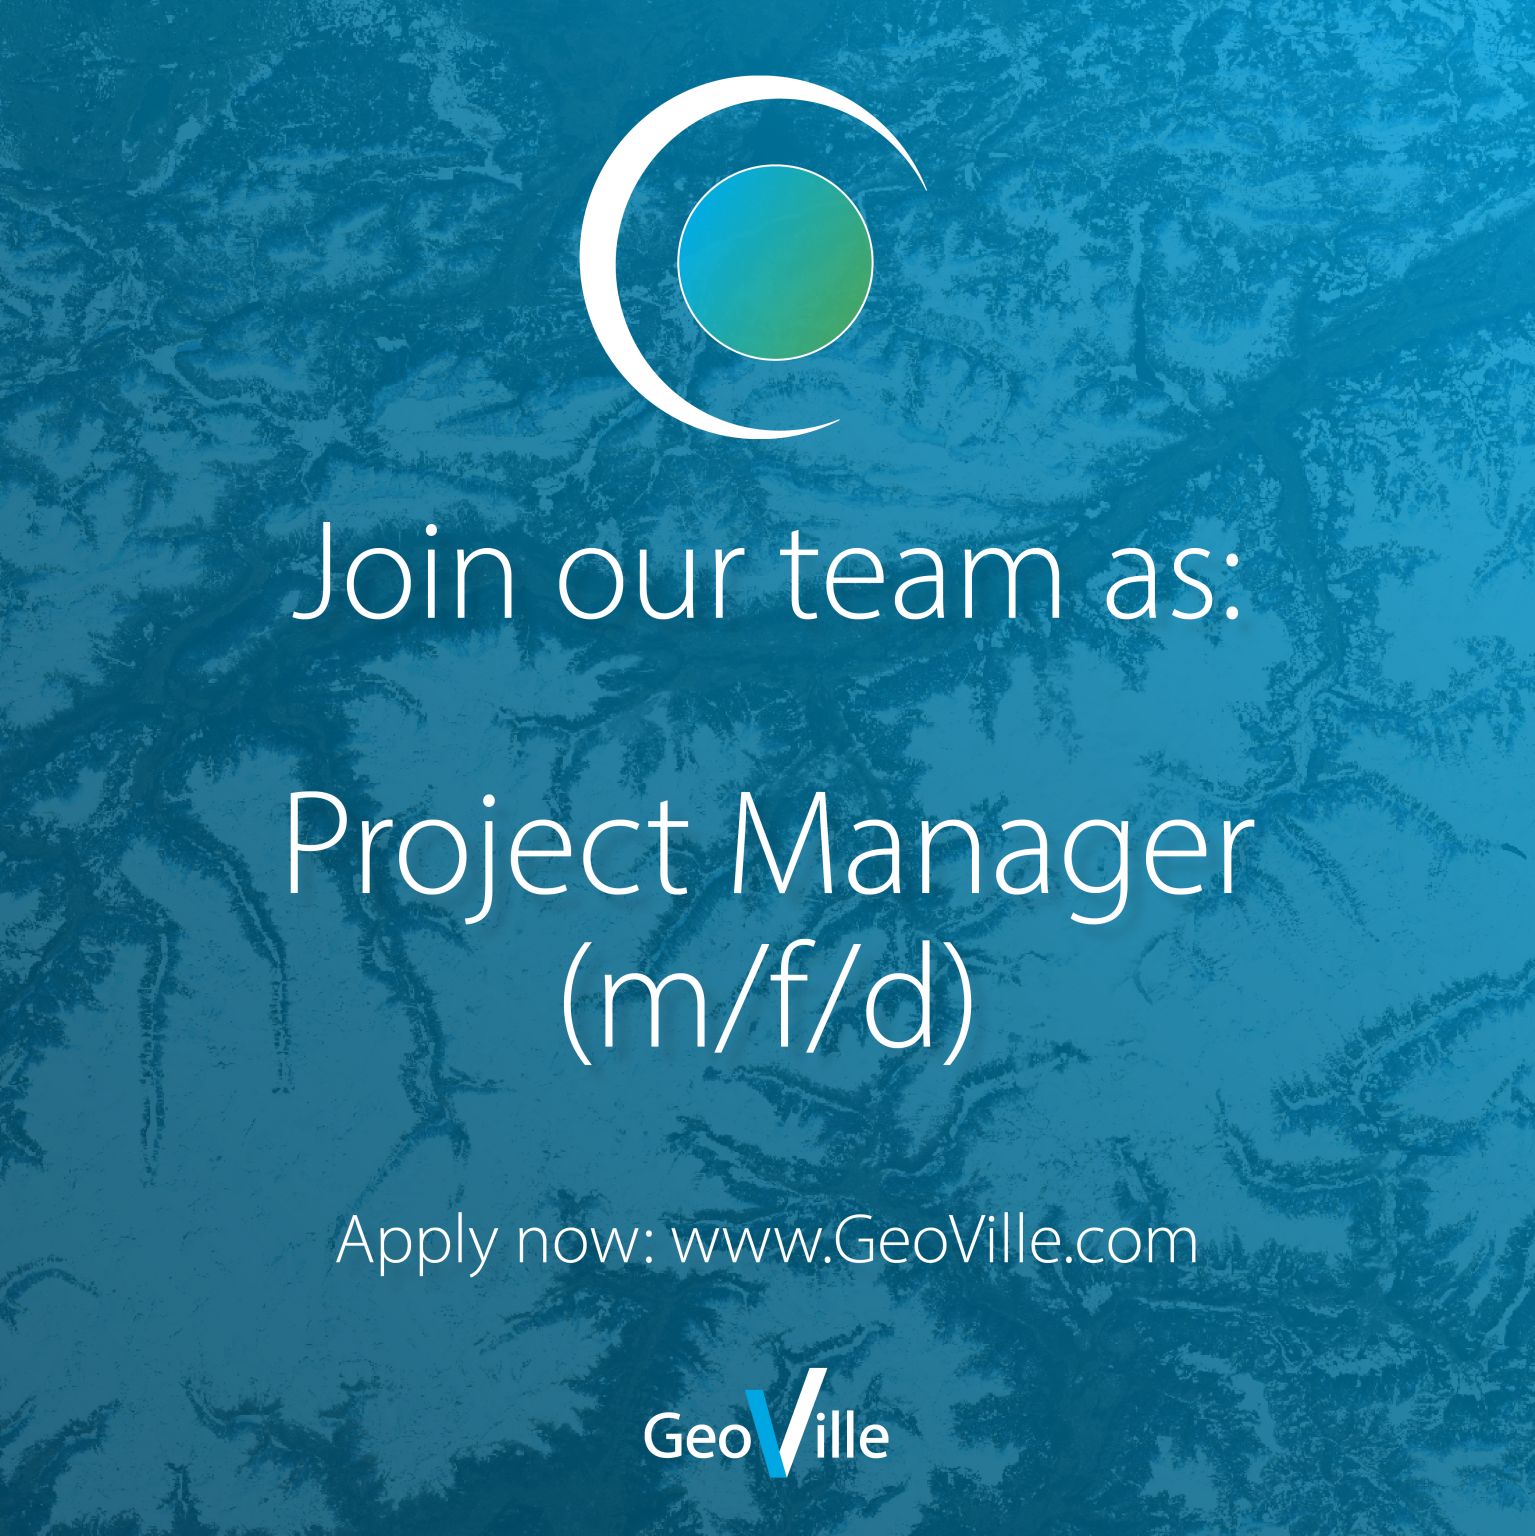 GeoVille Job Offer: Project Manager